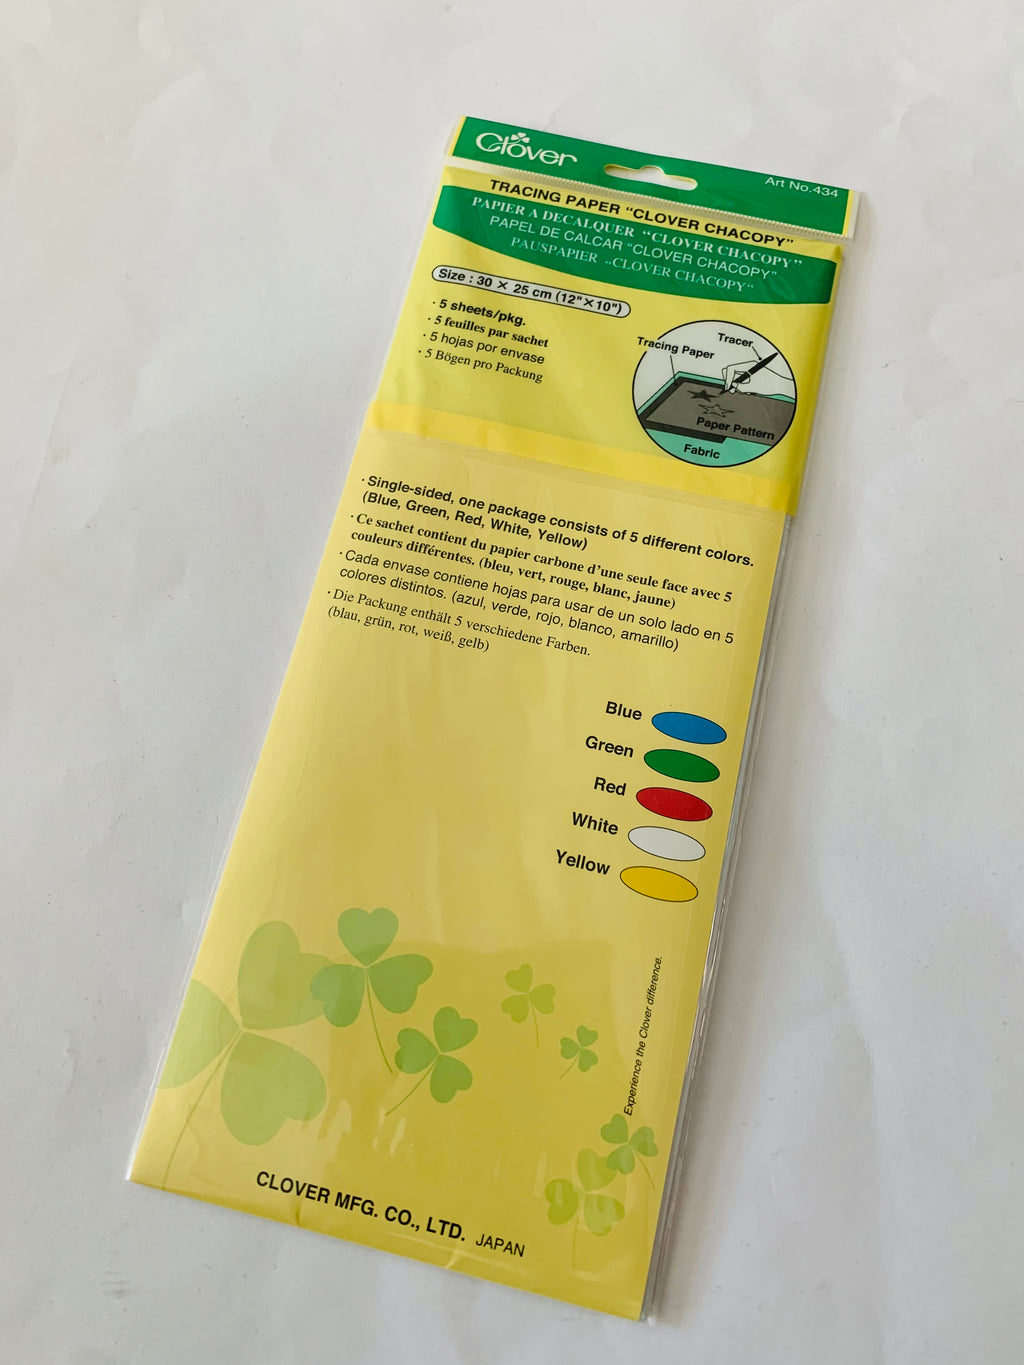 Clover Tracing Paper ‘Clover Chacopy’